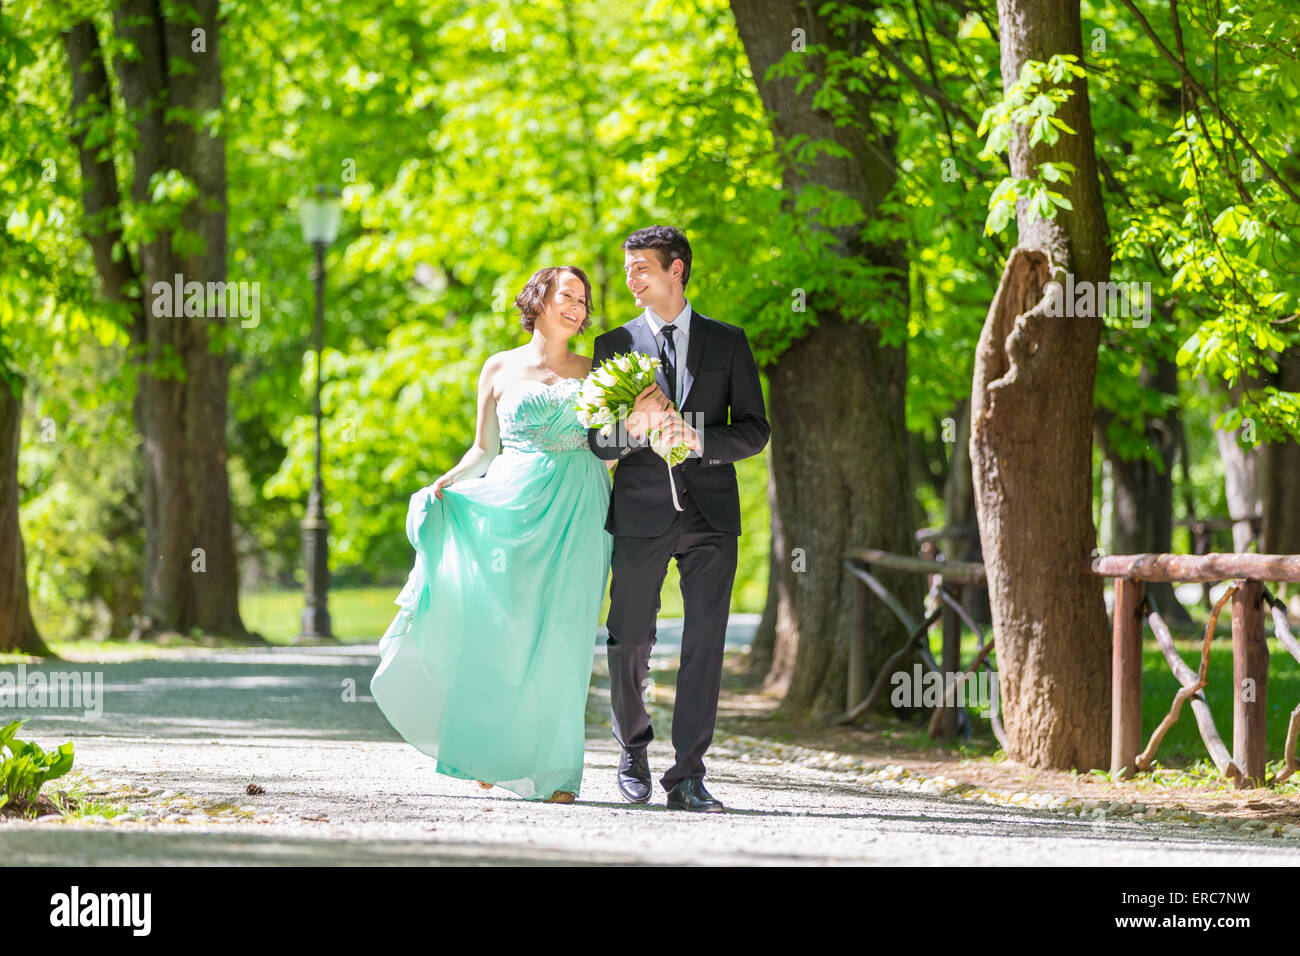 Wedding couple walking in park. Banque D'Images